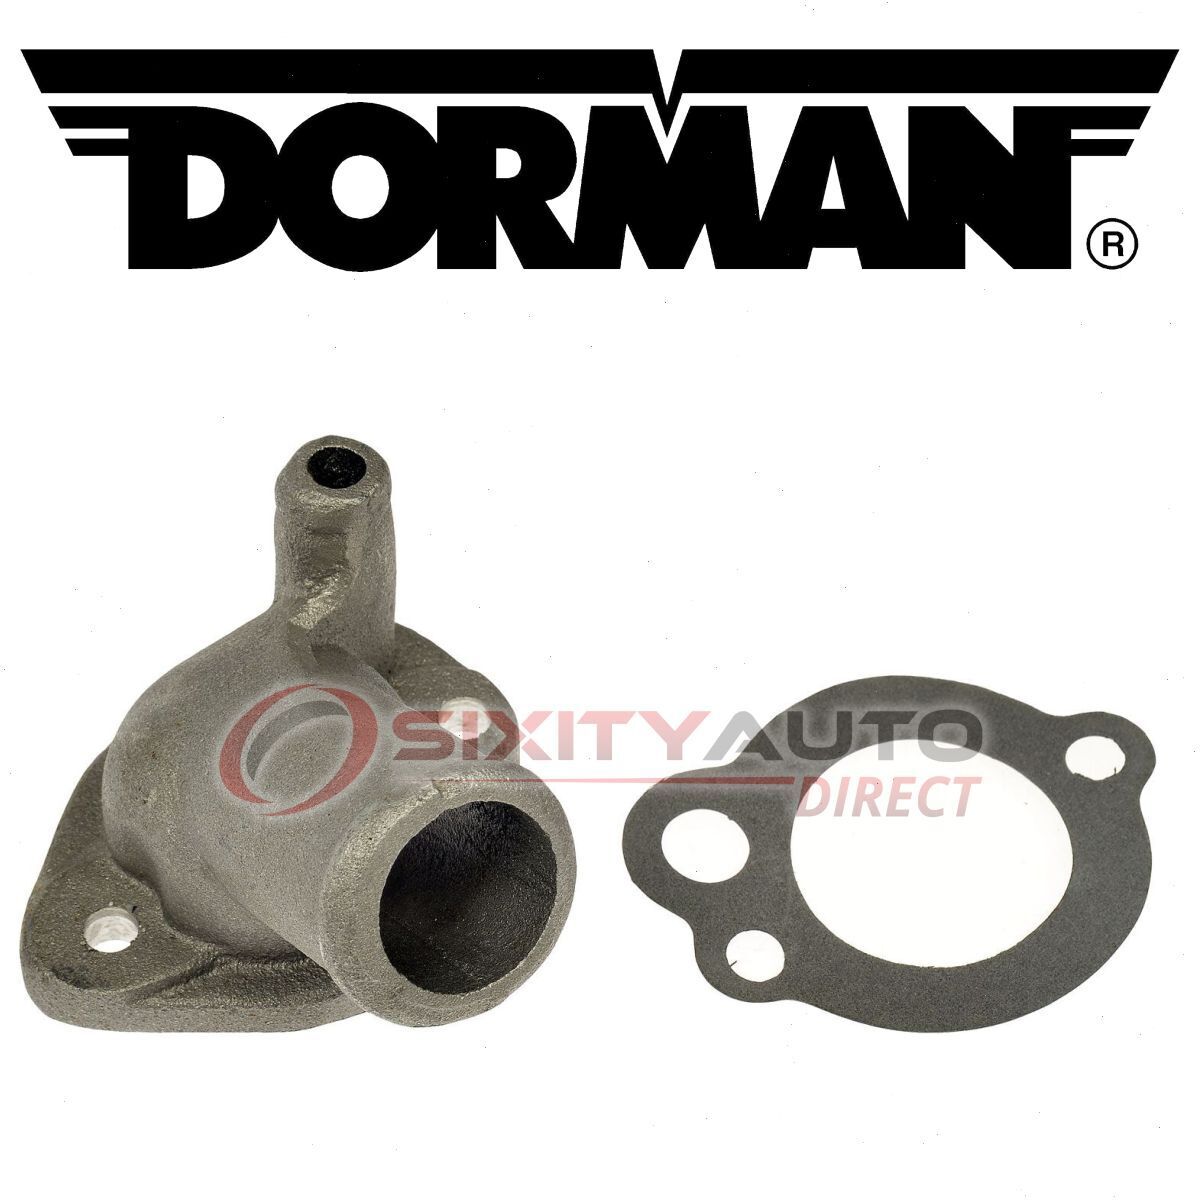 Dorman Engine Coolant Thermostat Housing for 1977-1979 Oldsmobile Cutlass zy